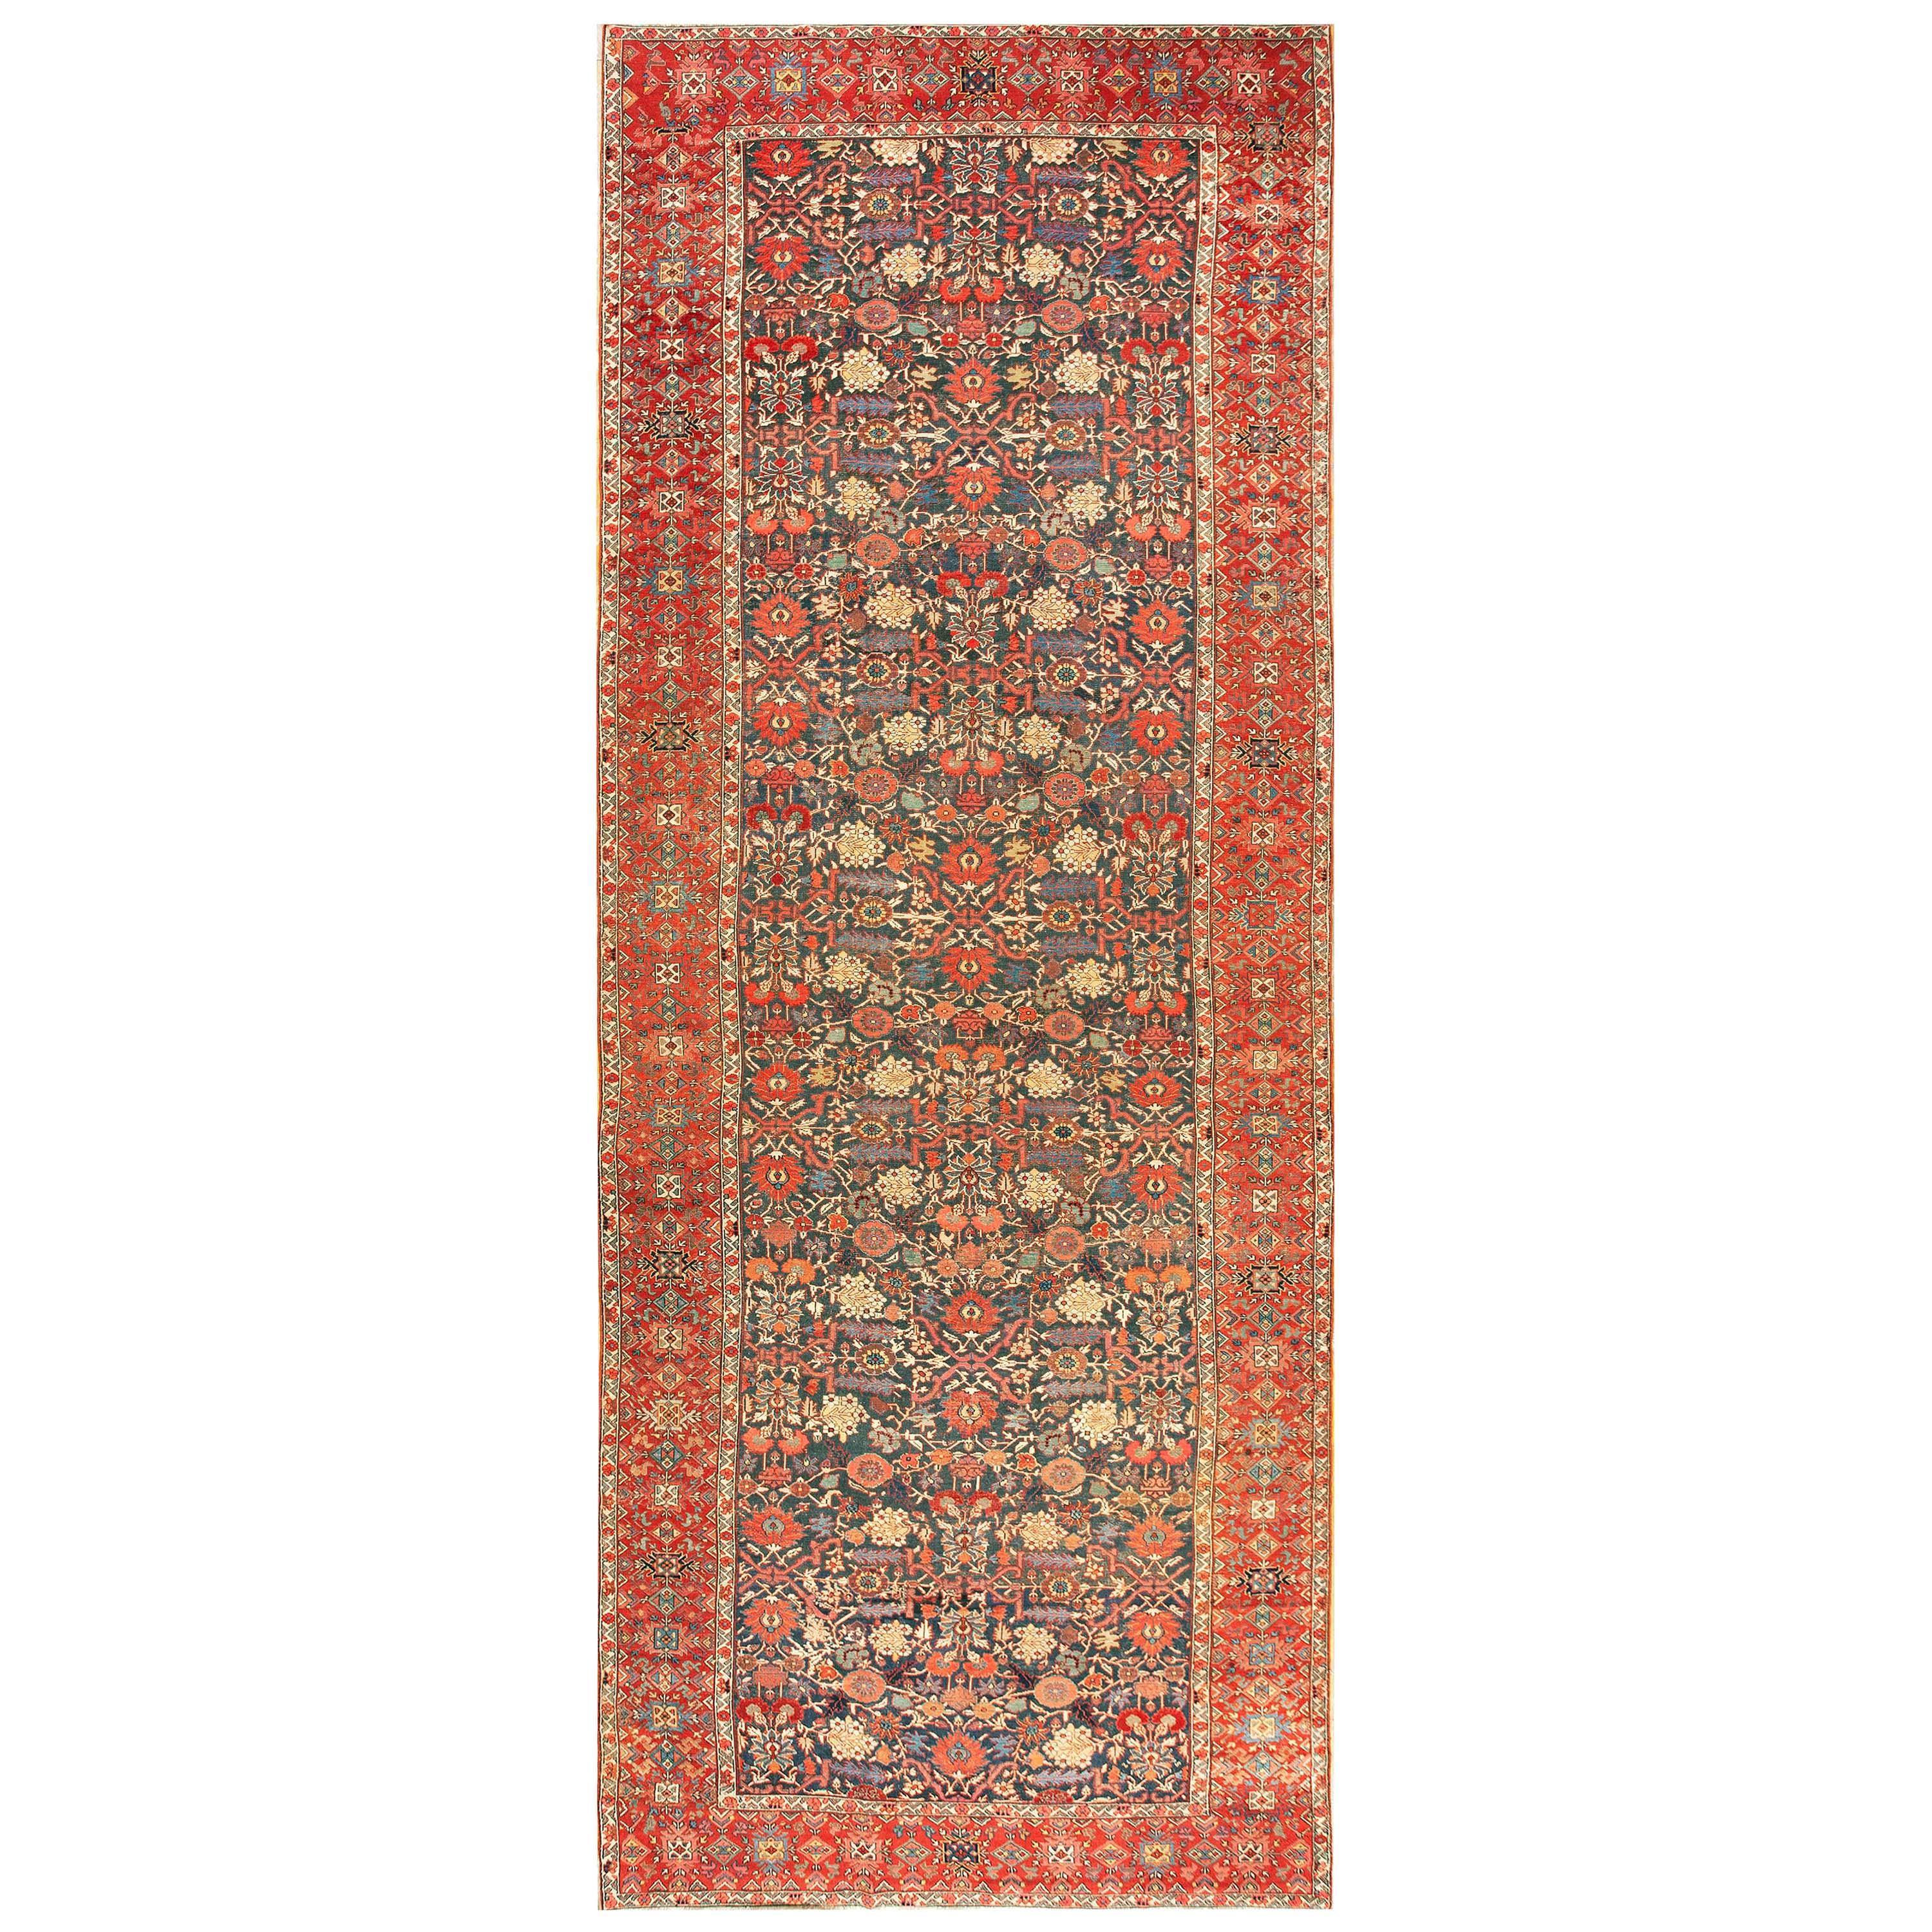 Mid 19th Century N.W. Persian Gallery Carpet ( 6'10"x 18'10" - 208 x 574 ) For Sale